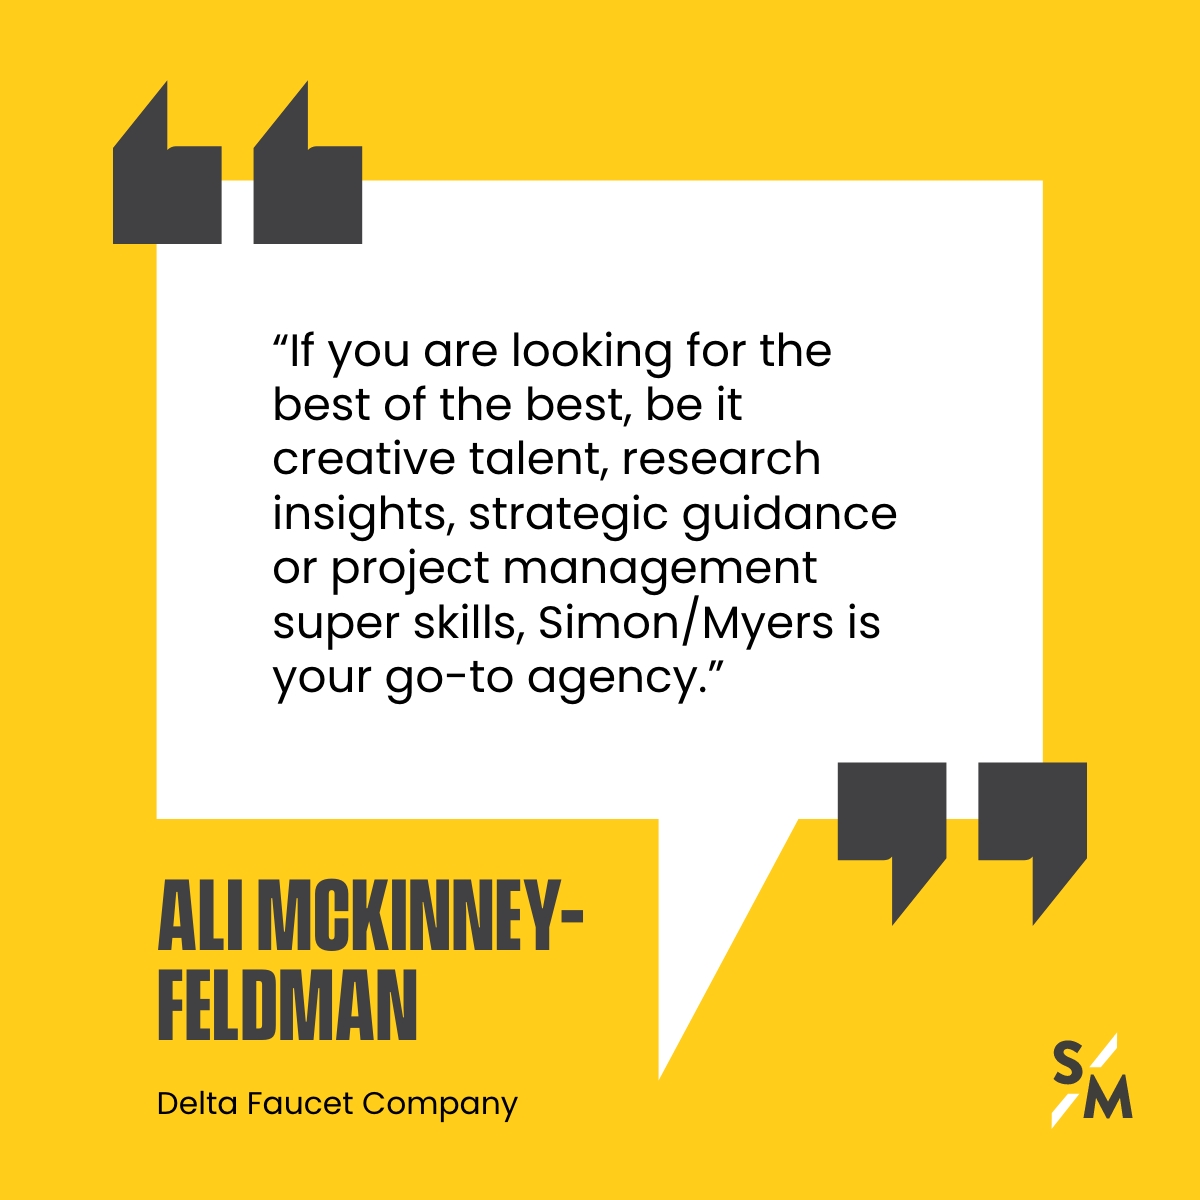 Ali, thanks for being our go-to, too.

#creativeagency #chicagoagency #strategyagency #brandingagency #chicagocreatives